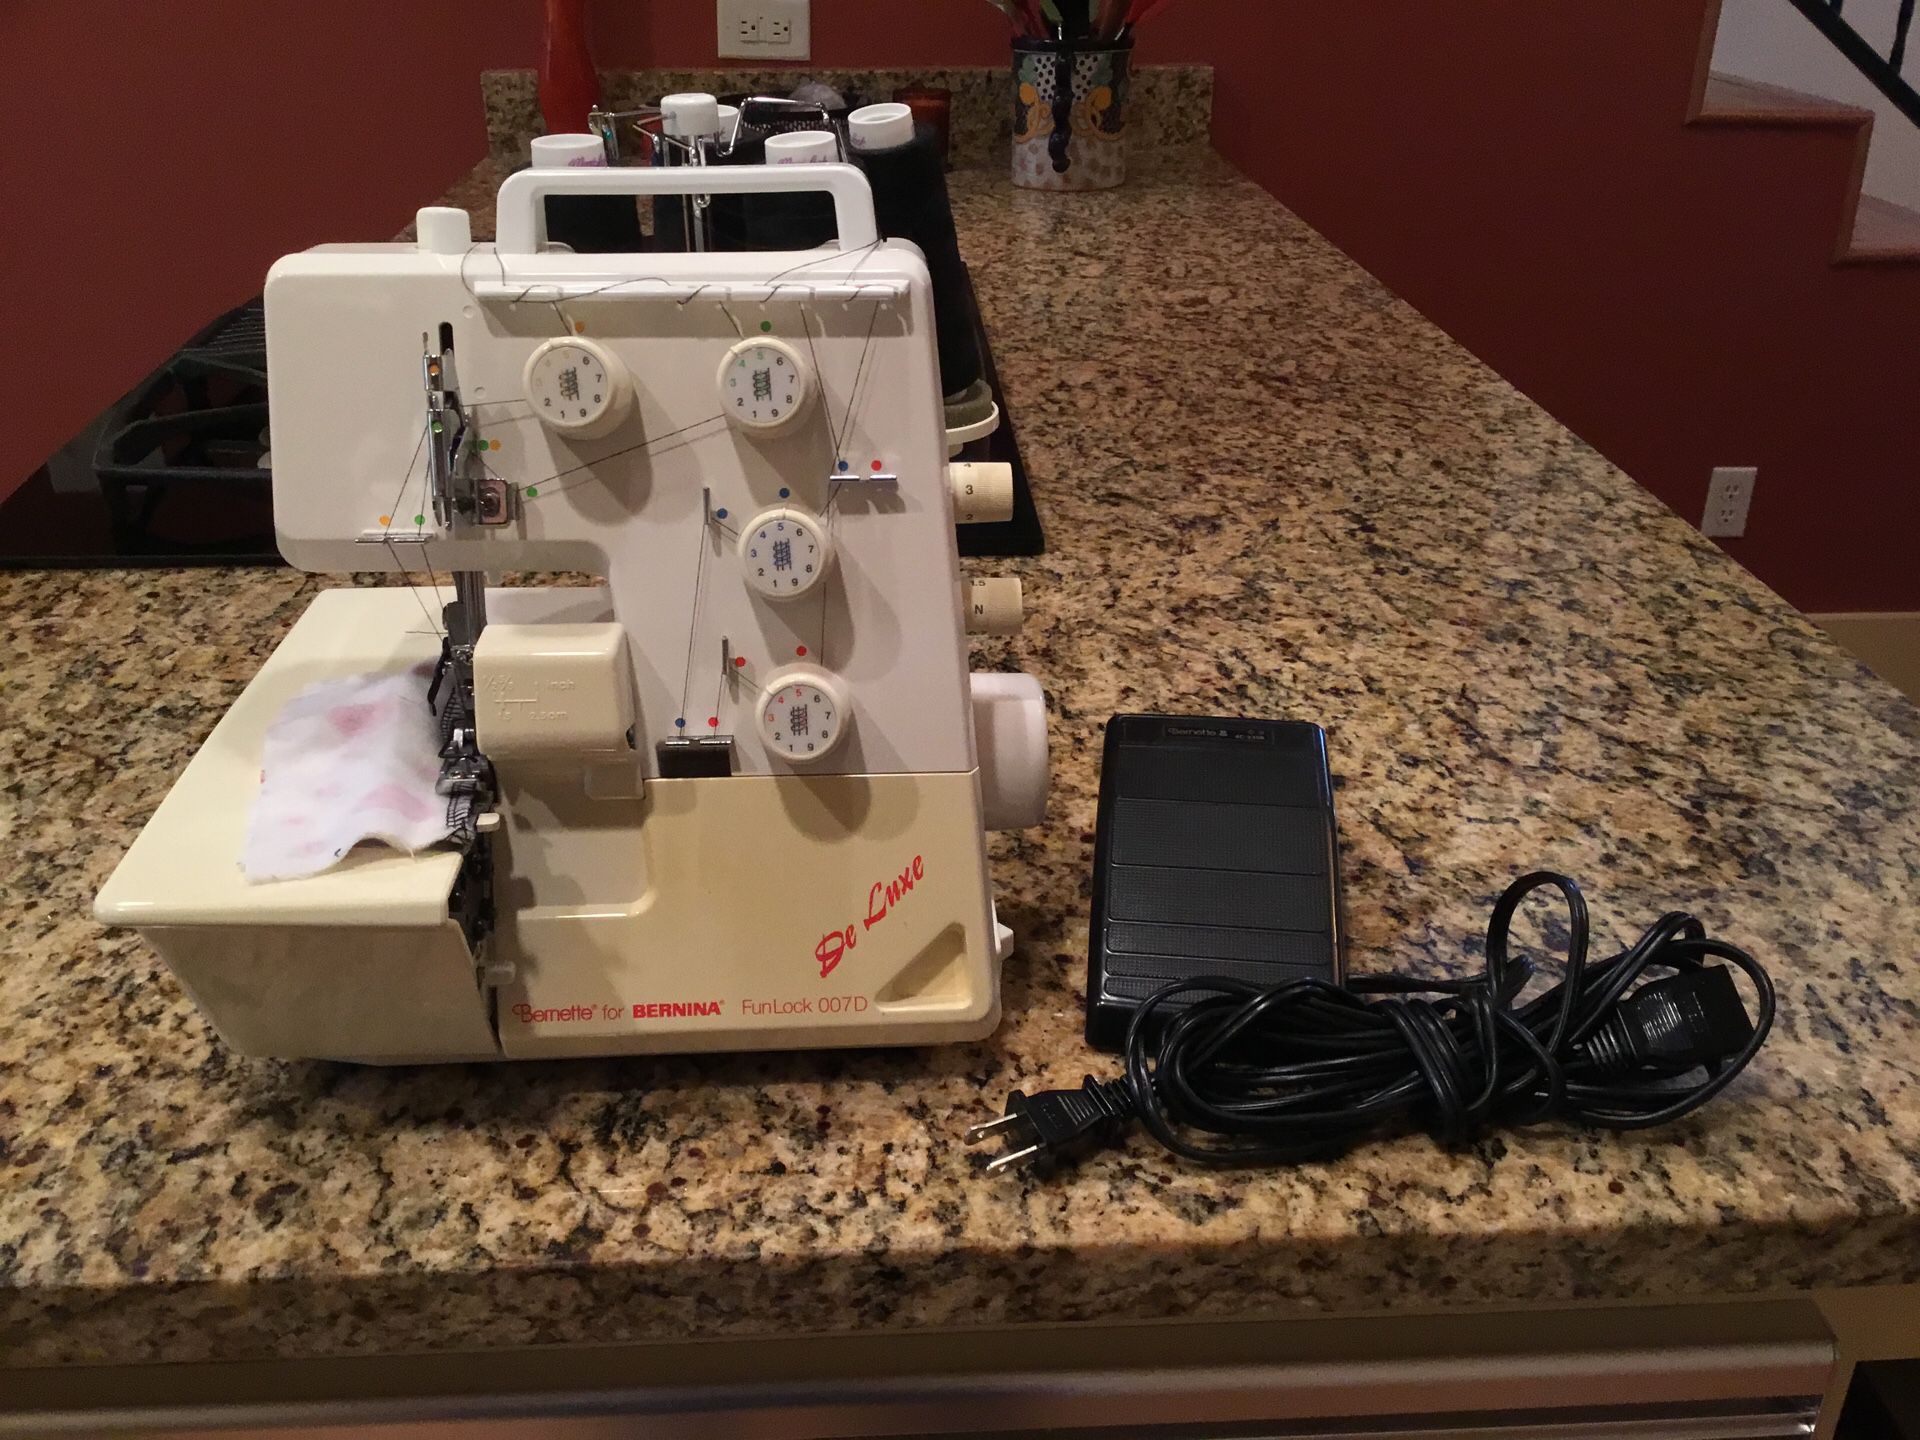 Reduced! Bernette for Bernina FunLock Deluxe 007D 4-Spool Serger Sewing Machine w/Tapestry Carry Bag Foot Pedal Extra Thread